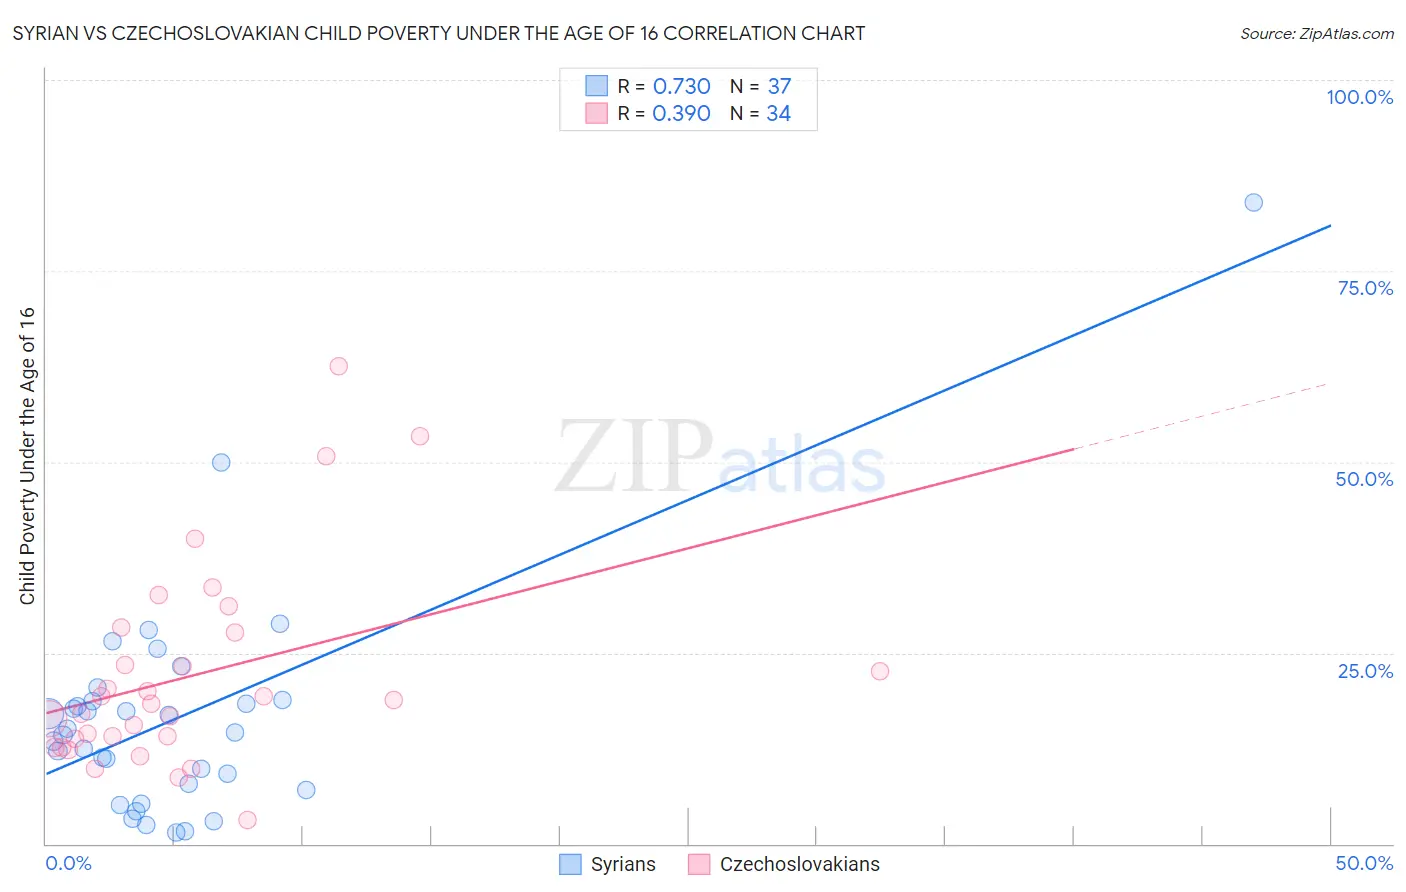 Syrian vs Czechoslovakian Child Poverty Under the Age of 16